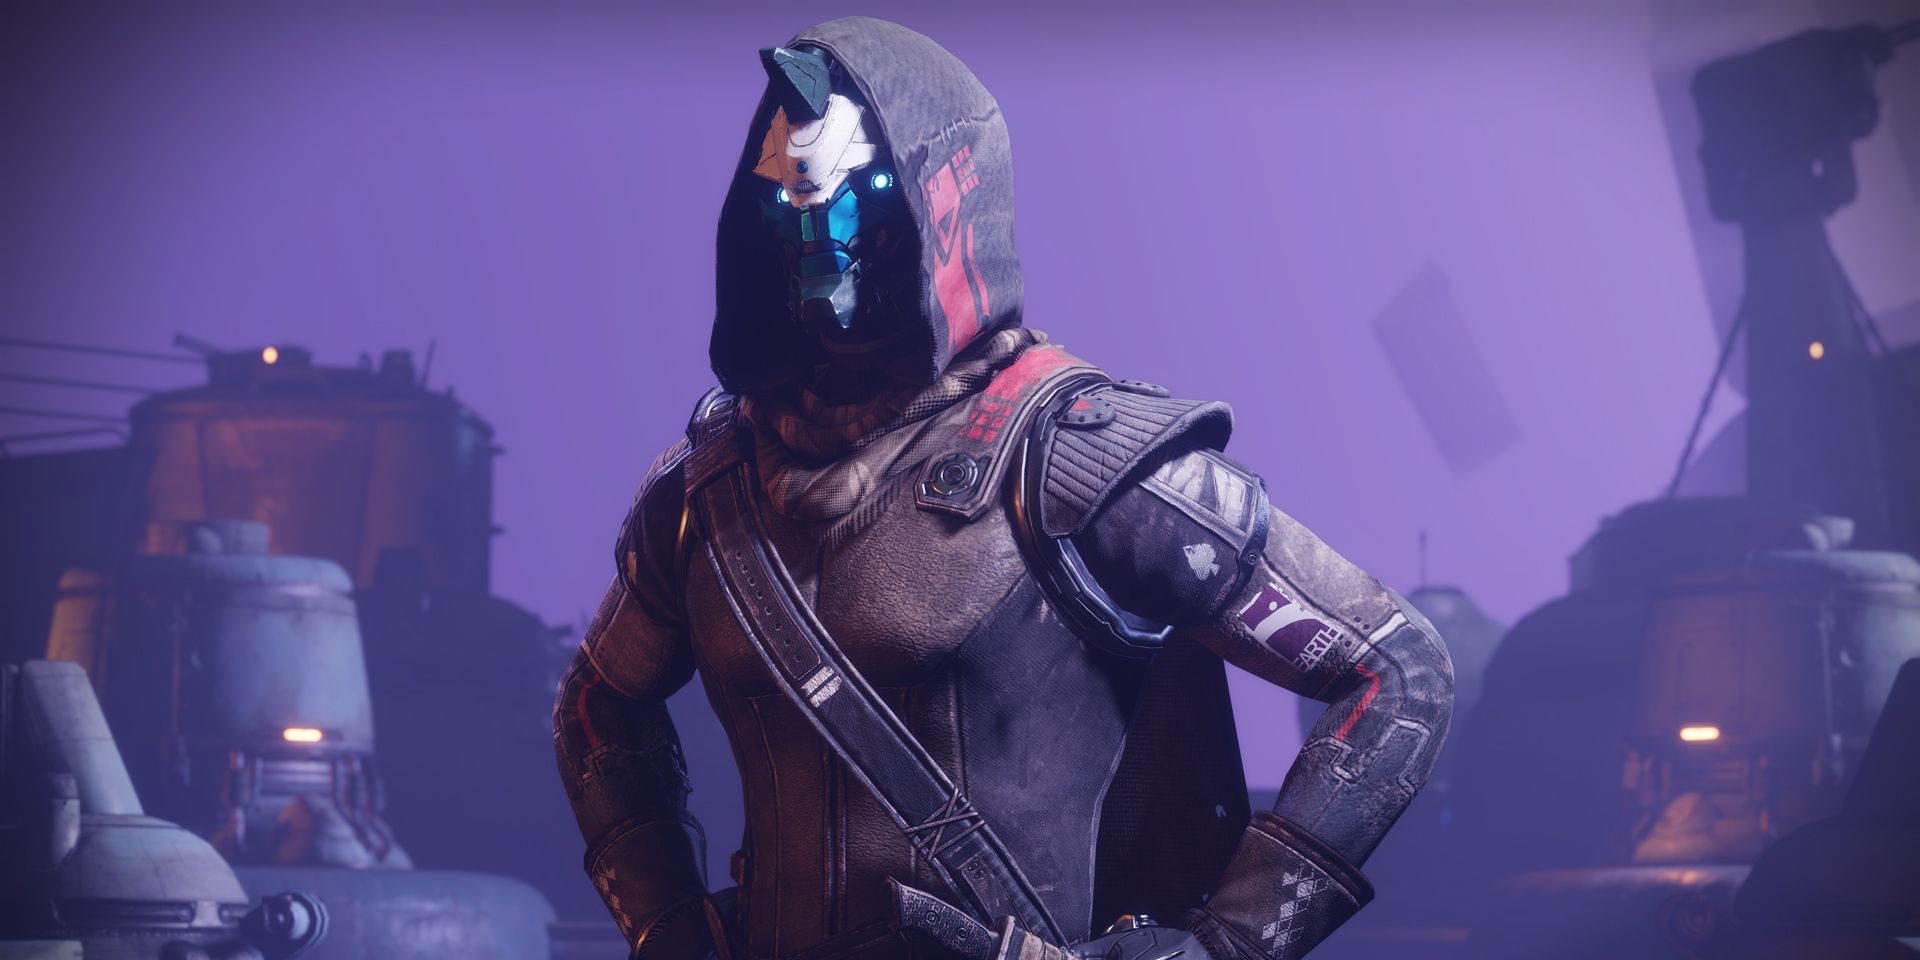 Destiny 2's Cayde-6 stands in an area that looks like the Prison of Elders in the Forsaken expansion.